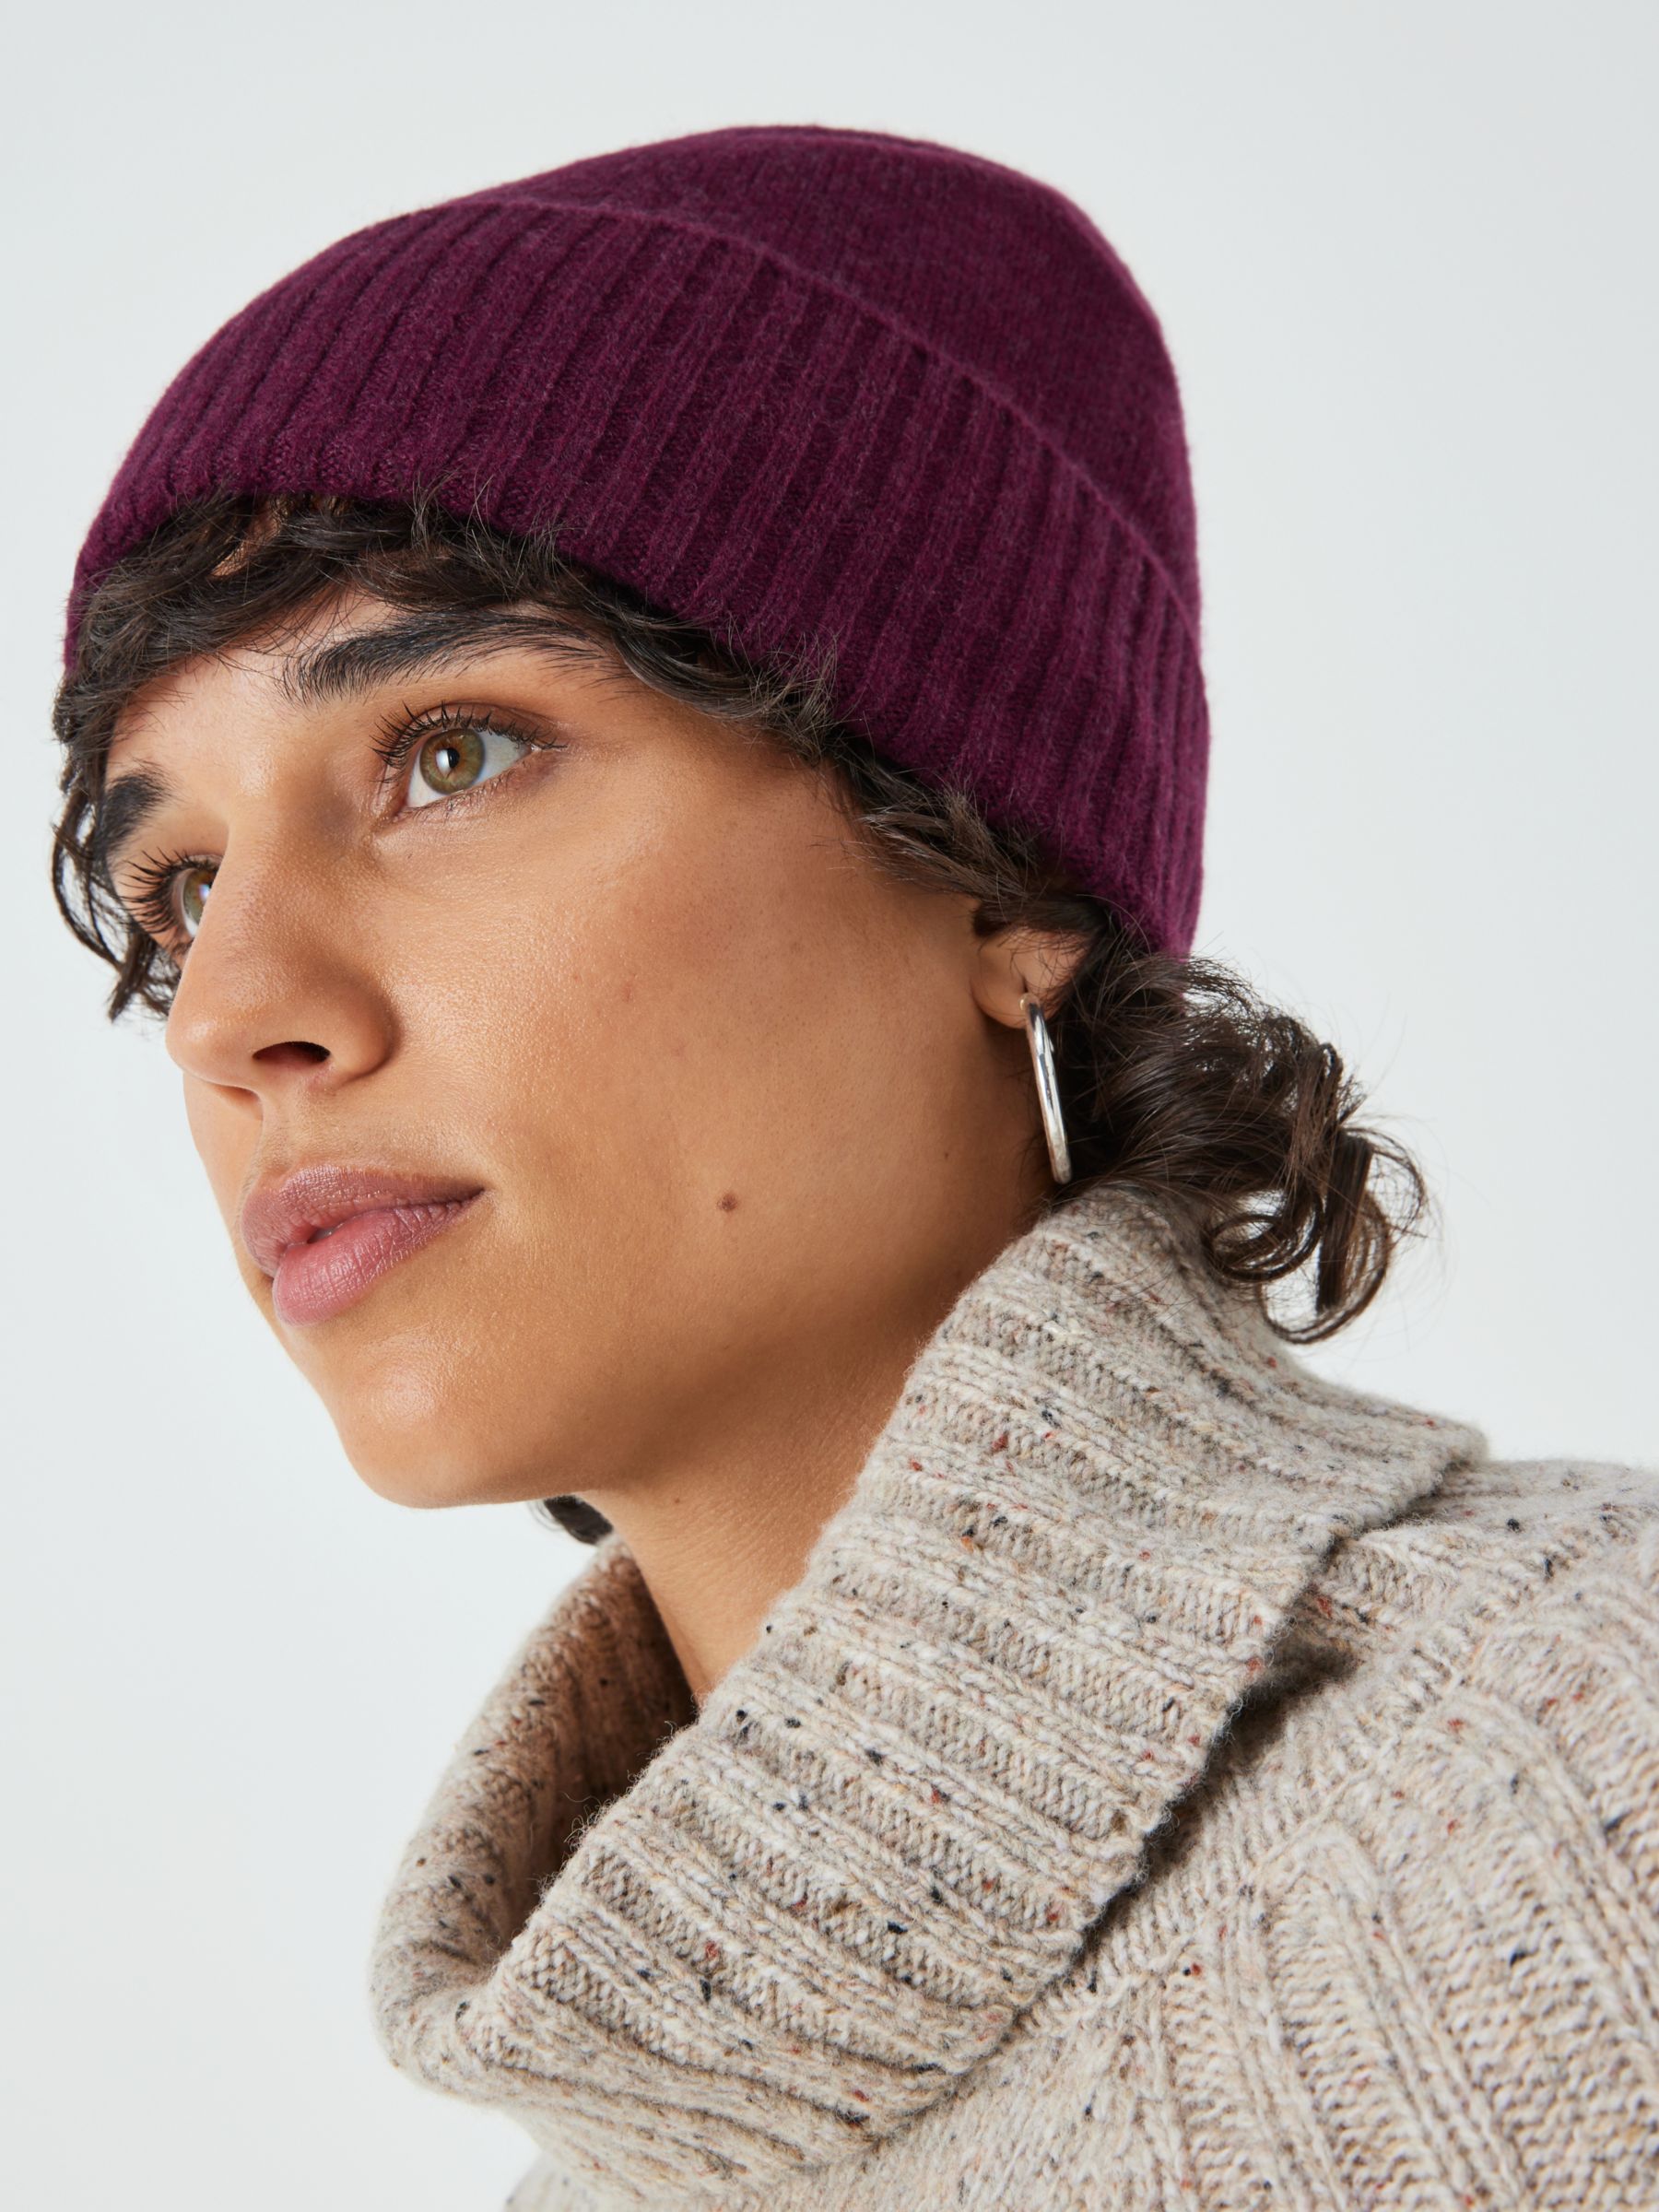 BOSS - Beanie hat and scarf set in metallised fabric